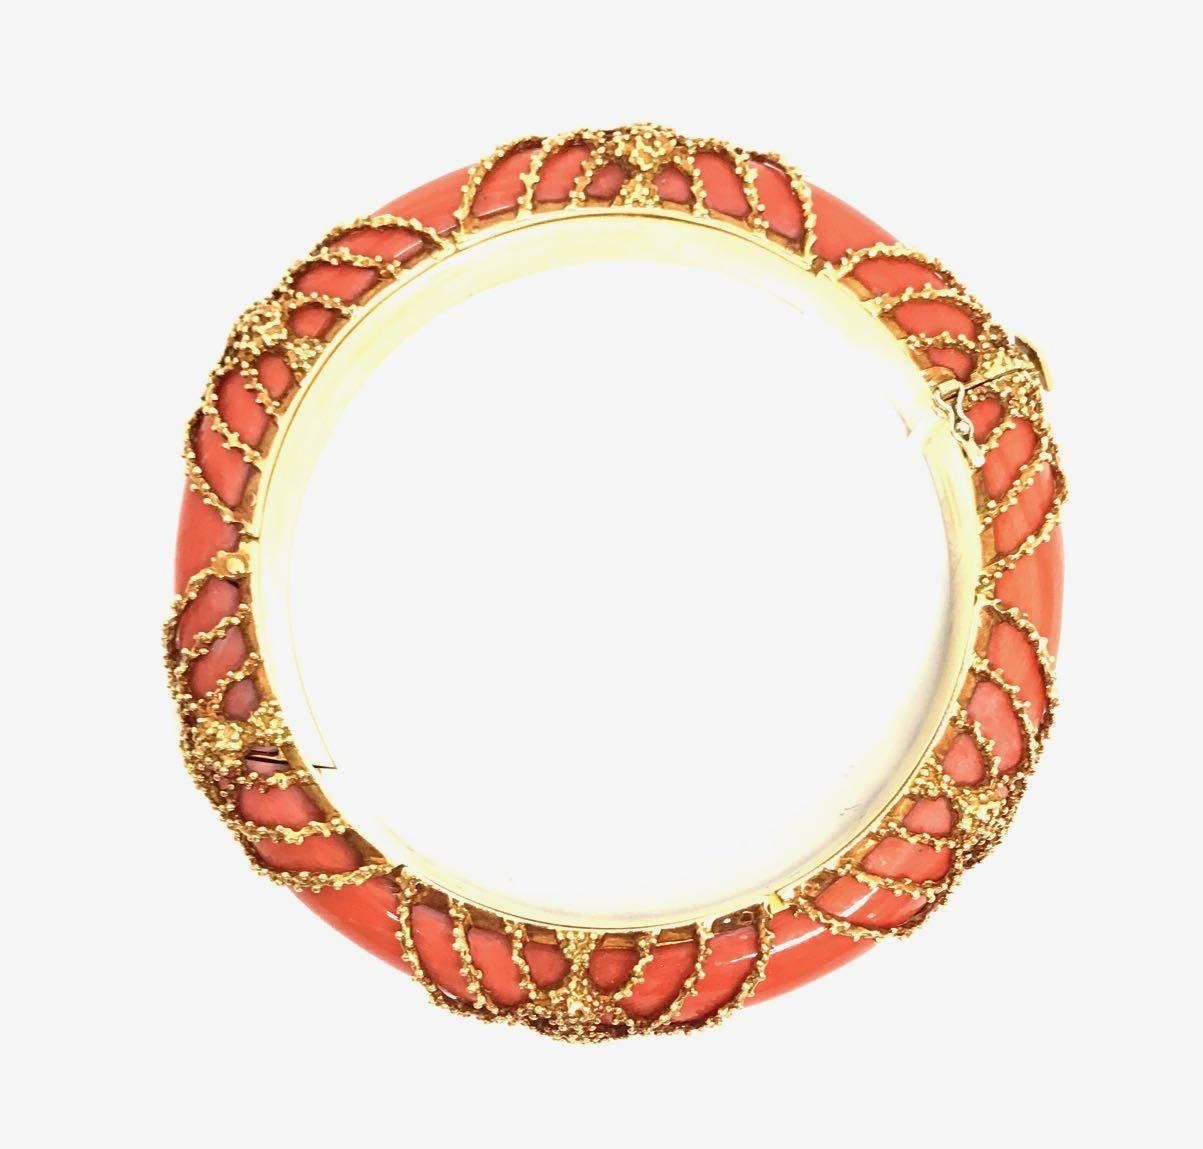 An exquisite and bold  coral bangle overlaid with textured netted gold. 

This extraordinary bangle was made by famous Parisian house  Van Cleef & Arpels in the mid 1960's. 

A real show stopper for a woman with refined taste. 

Signed and